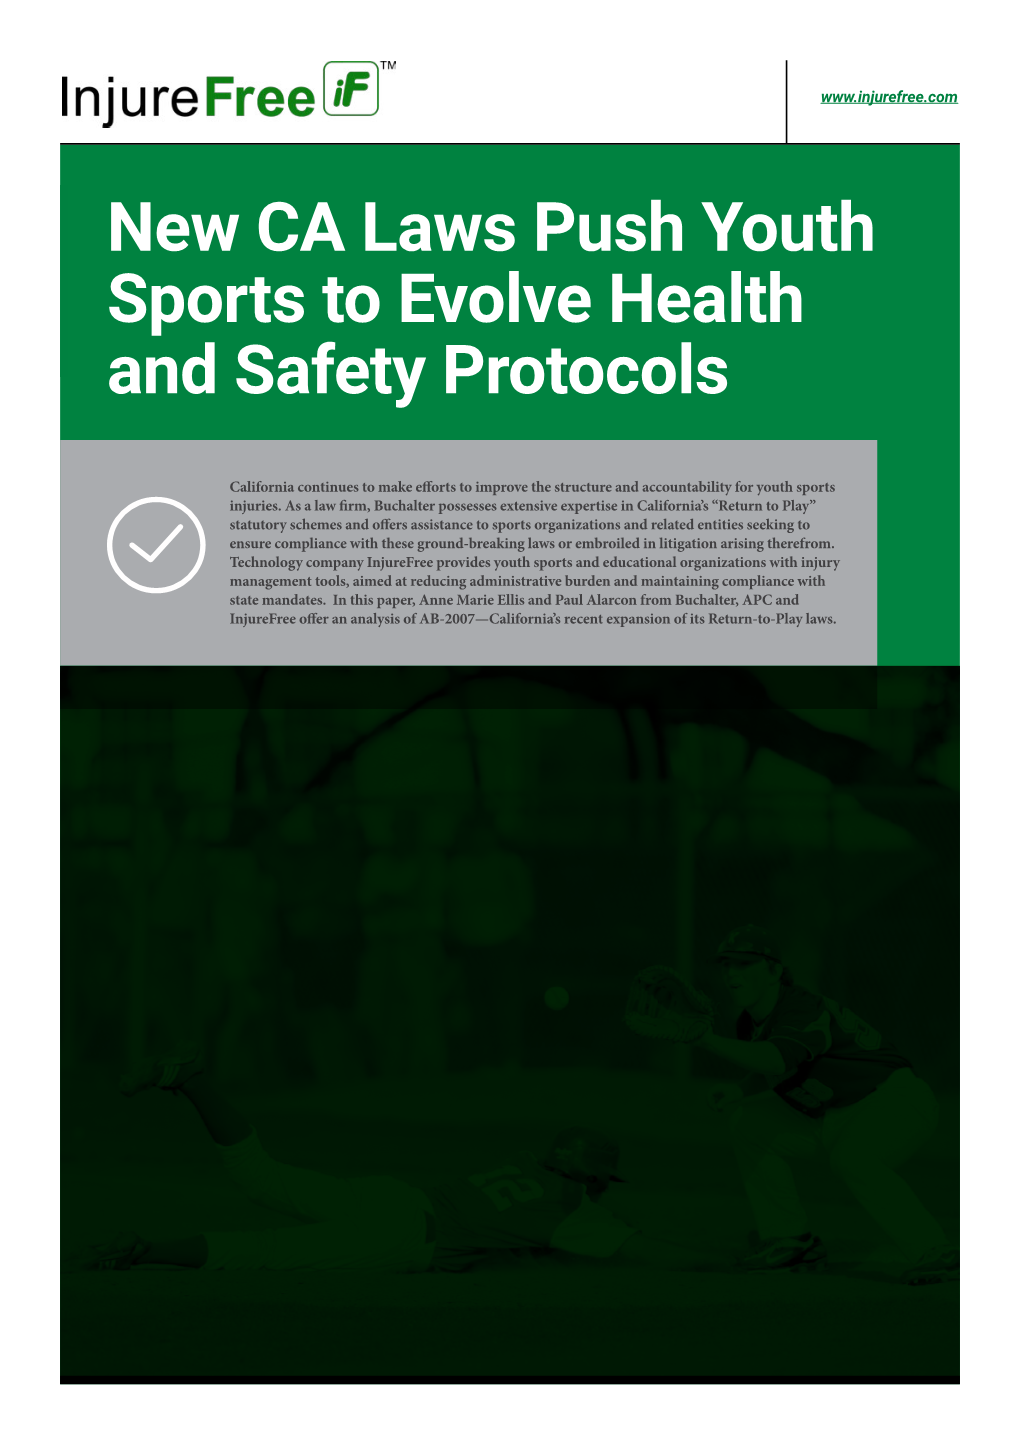 New CA Laws Push Youth Sports to Evolve Health and Safety Protocols